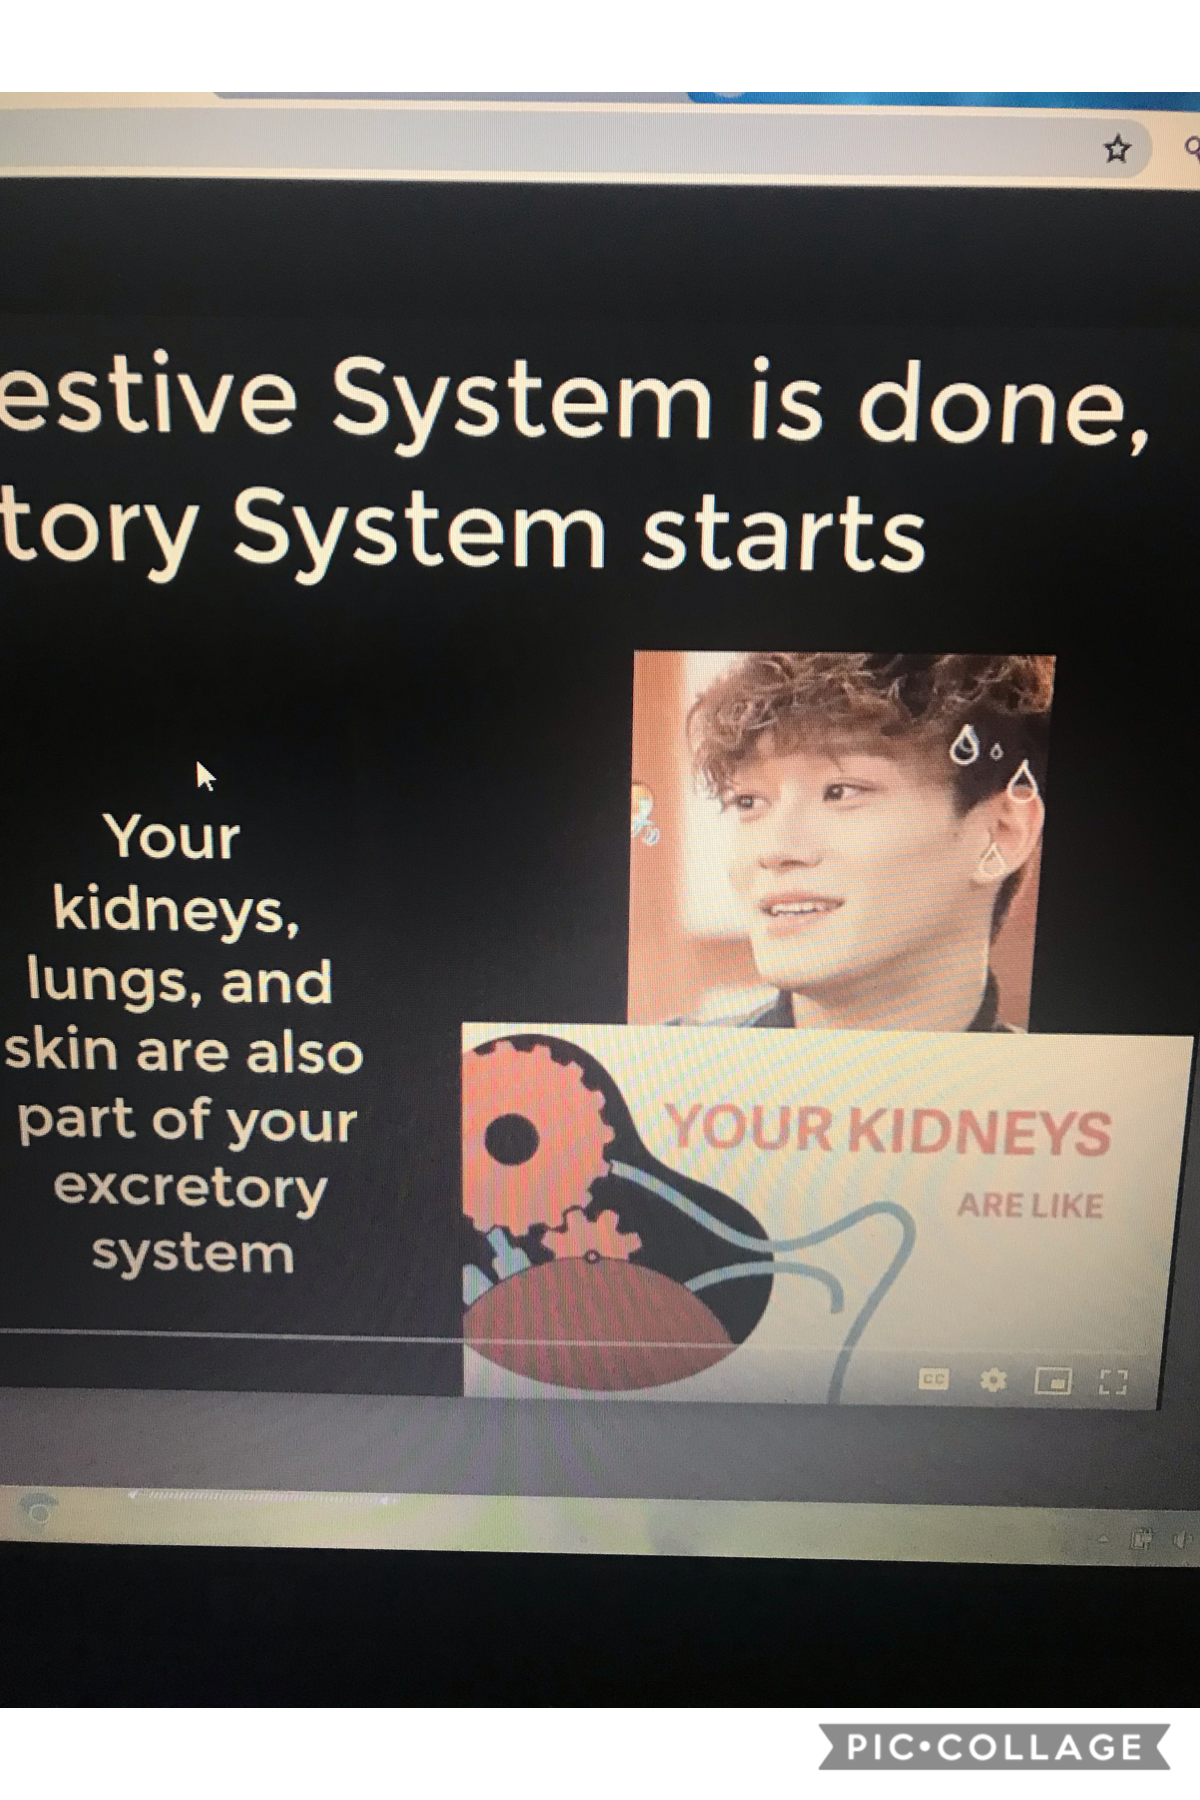 I thought I was supposed to be studying biology not Chen 😂😅